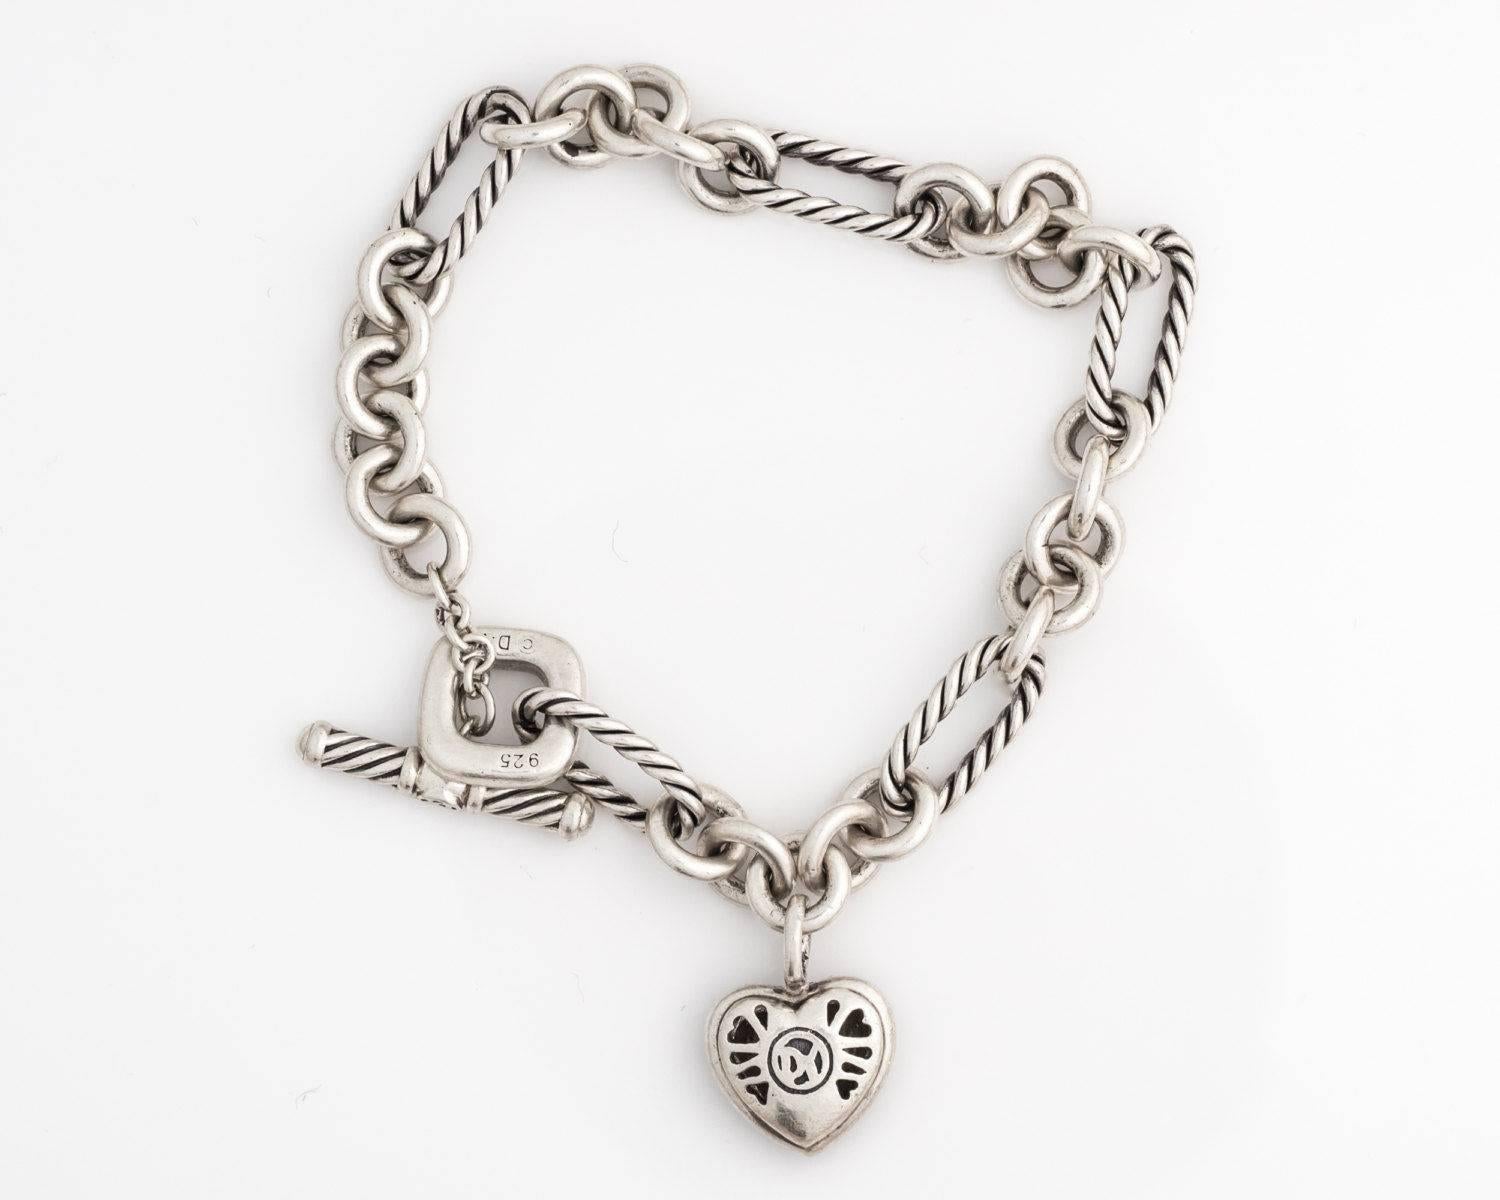 David Yurman Cable Diamond Heart Charm Toggle Bracelet in Sterling Silver

Features a Sterling Silver puffed cable heart framed by a Diamond Halo. The puffed back of the charm has heart shaped cut outs. The bracelet alternates Sterling Silver oval